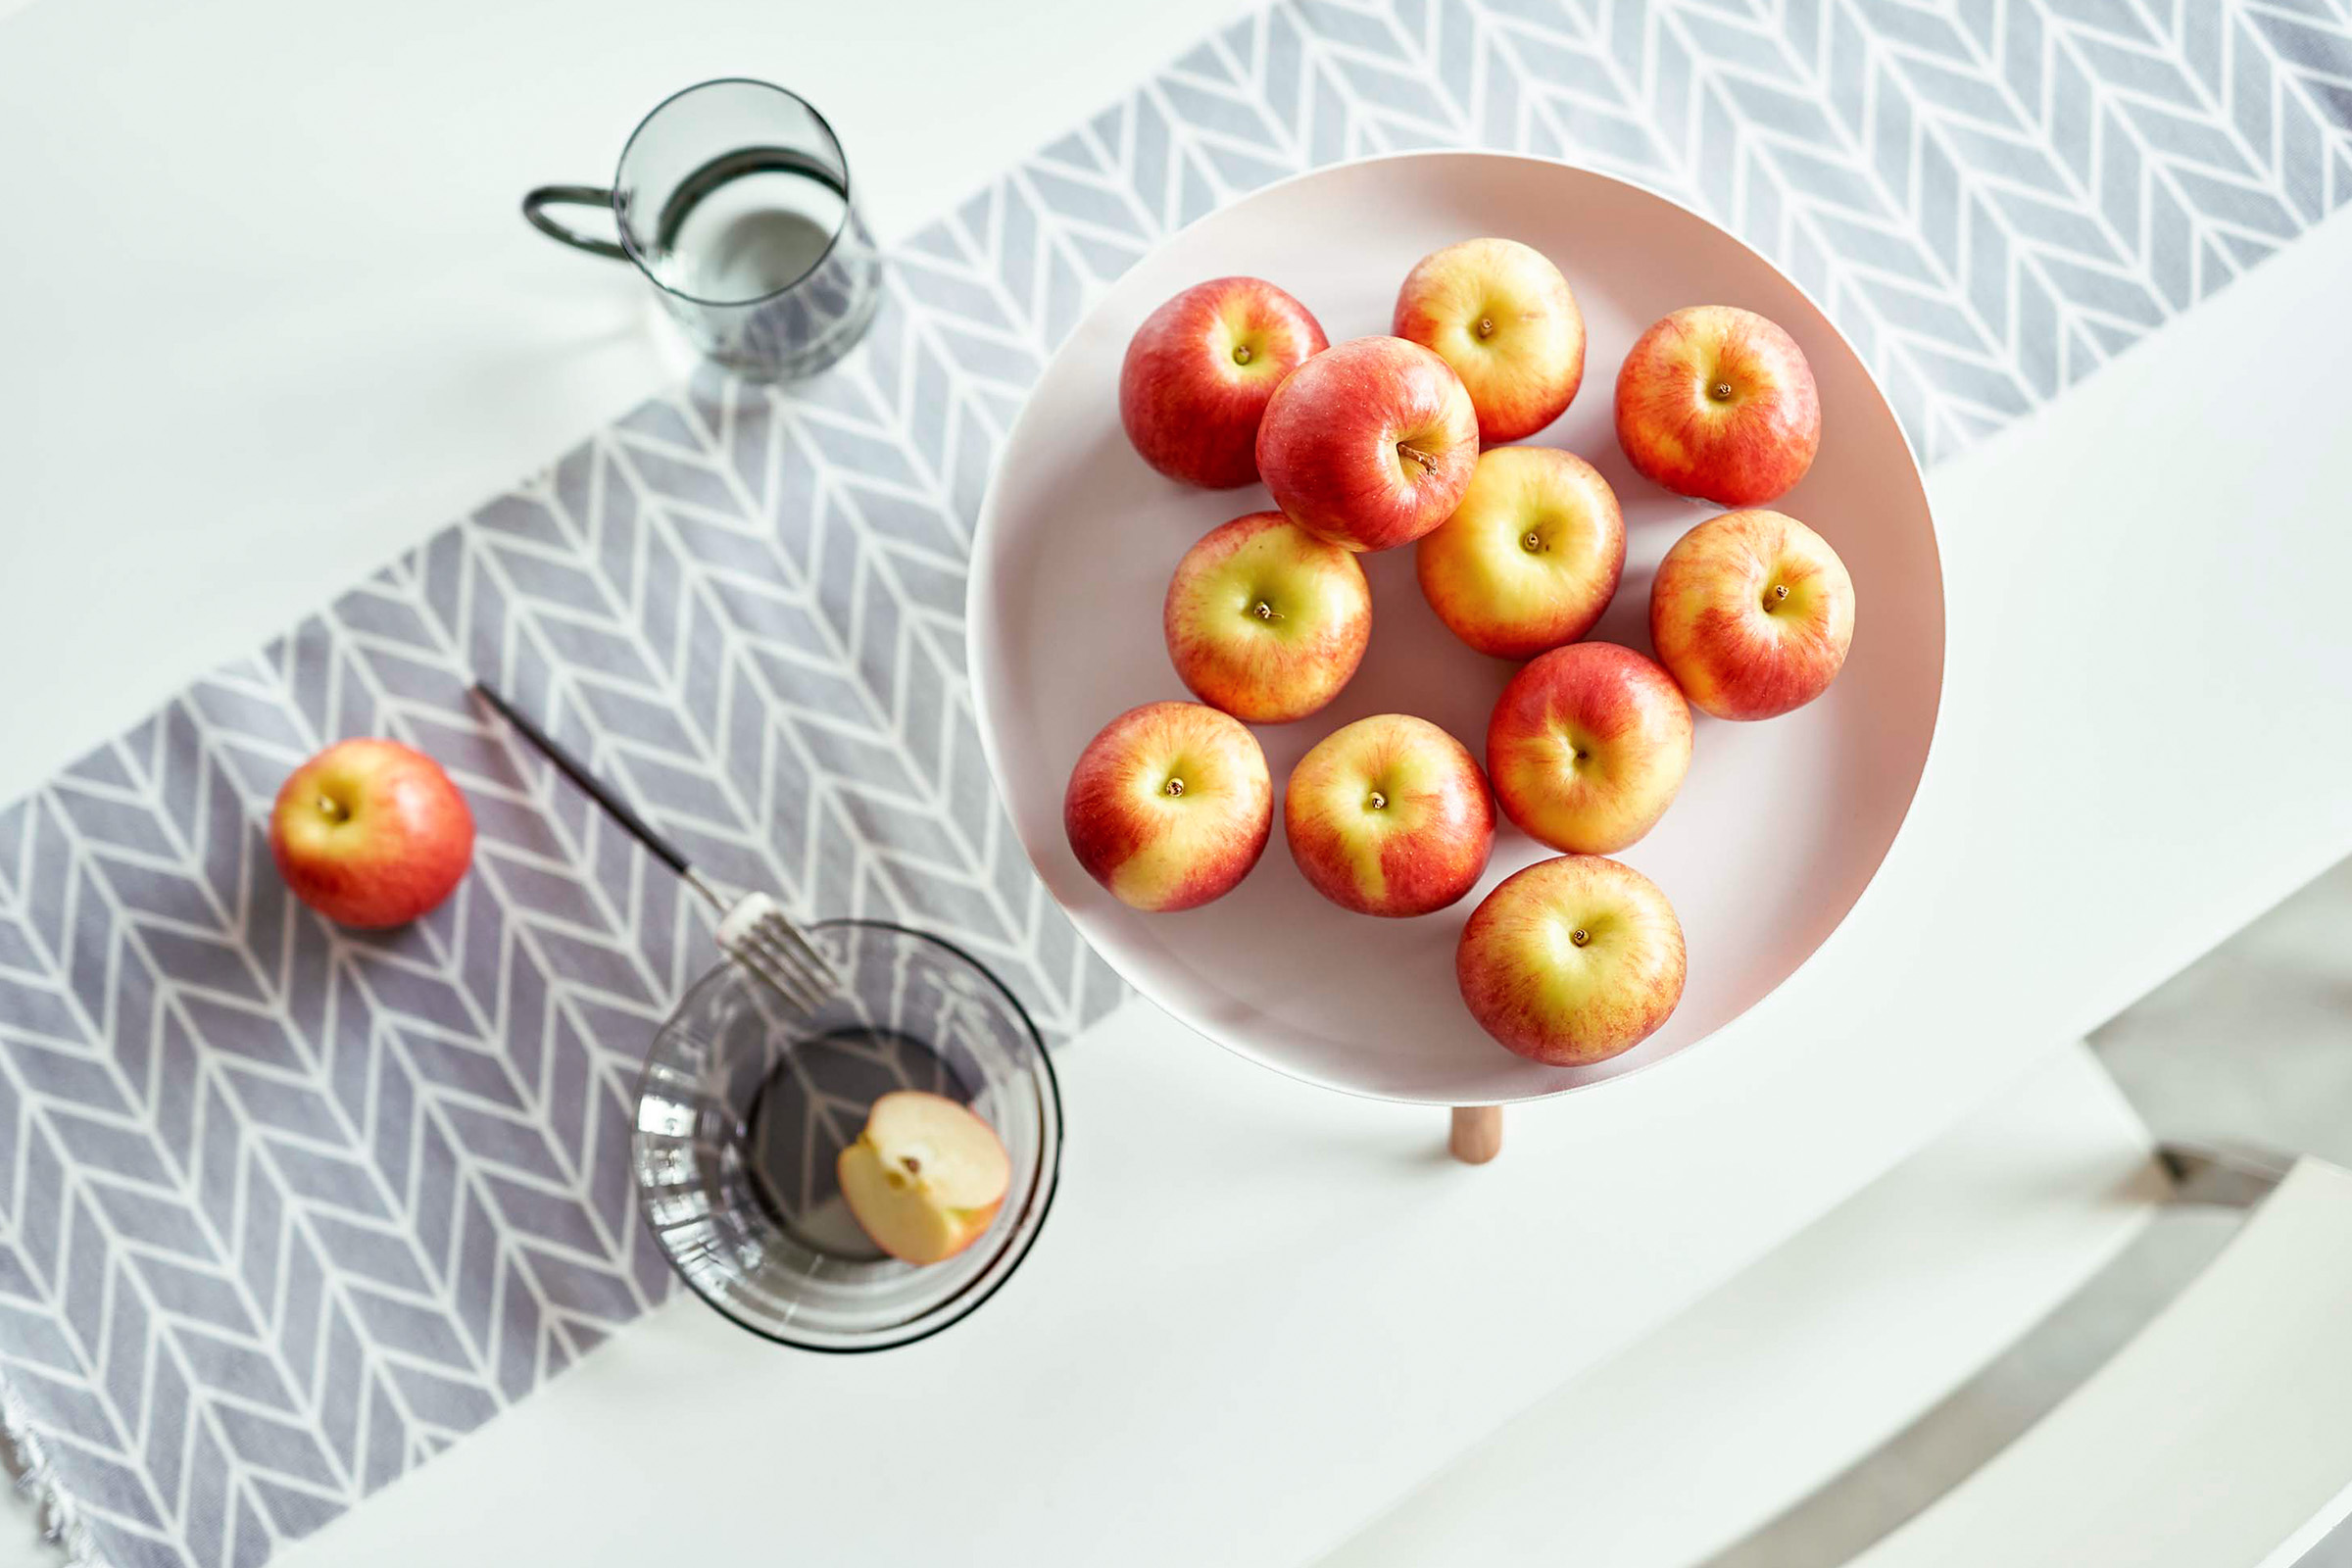 Aerial view of a white round steel pedestal stand on top of a dinner table. The stand is holding apples.